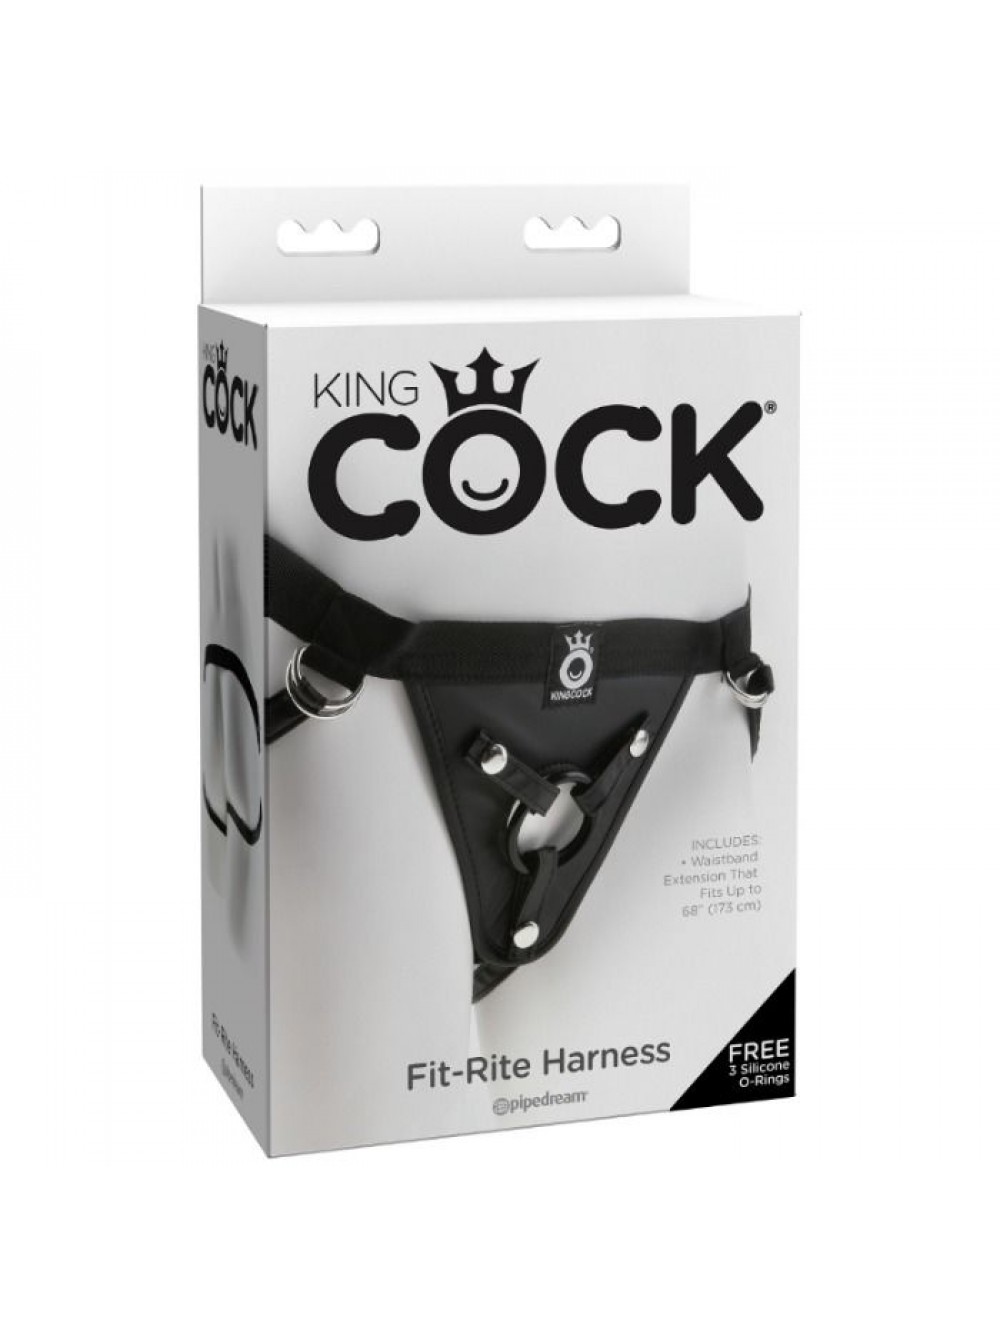 KING COCK FIT RITE HARNESS 603912739732